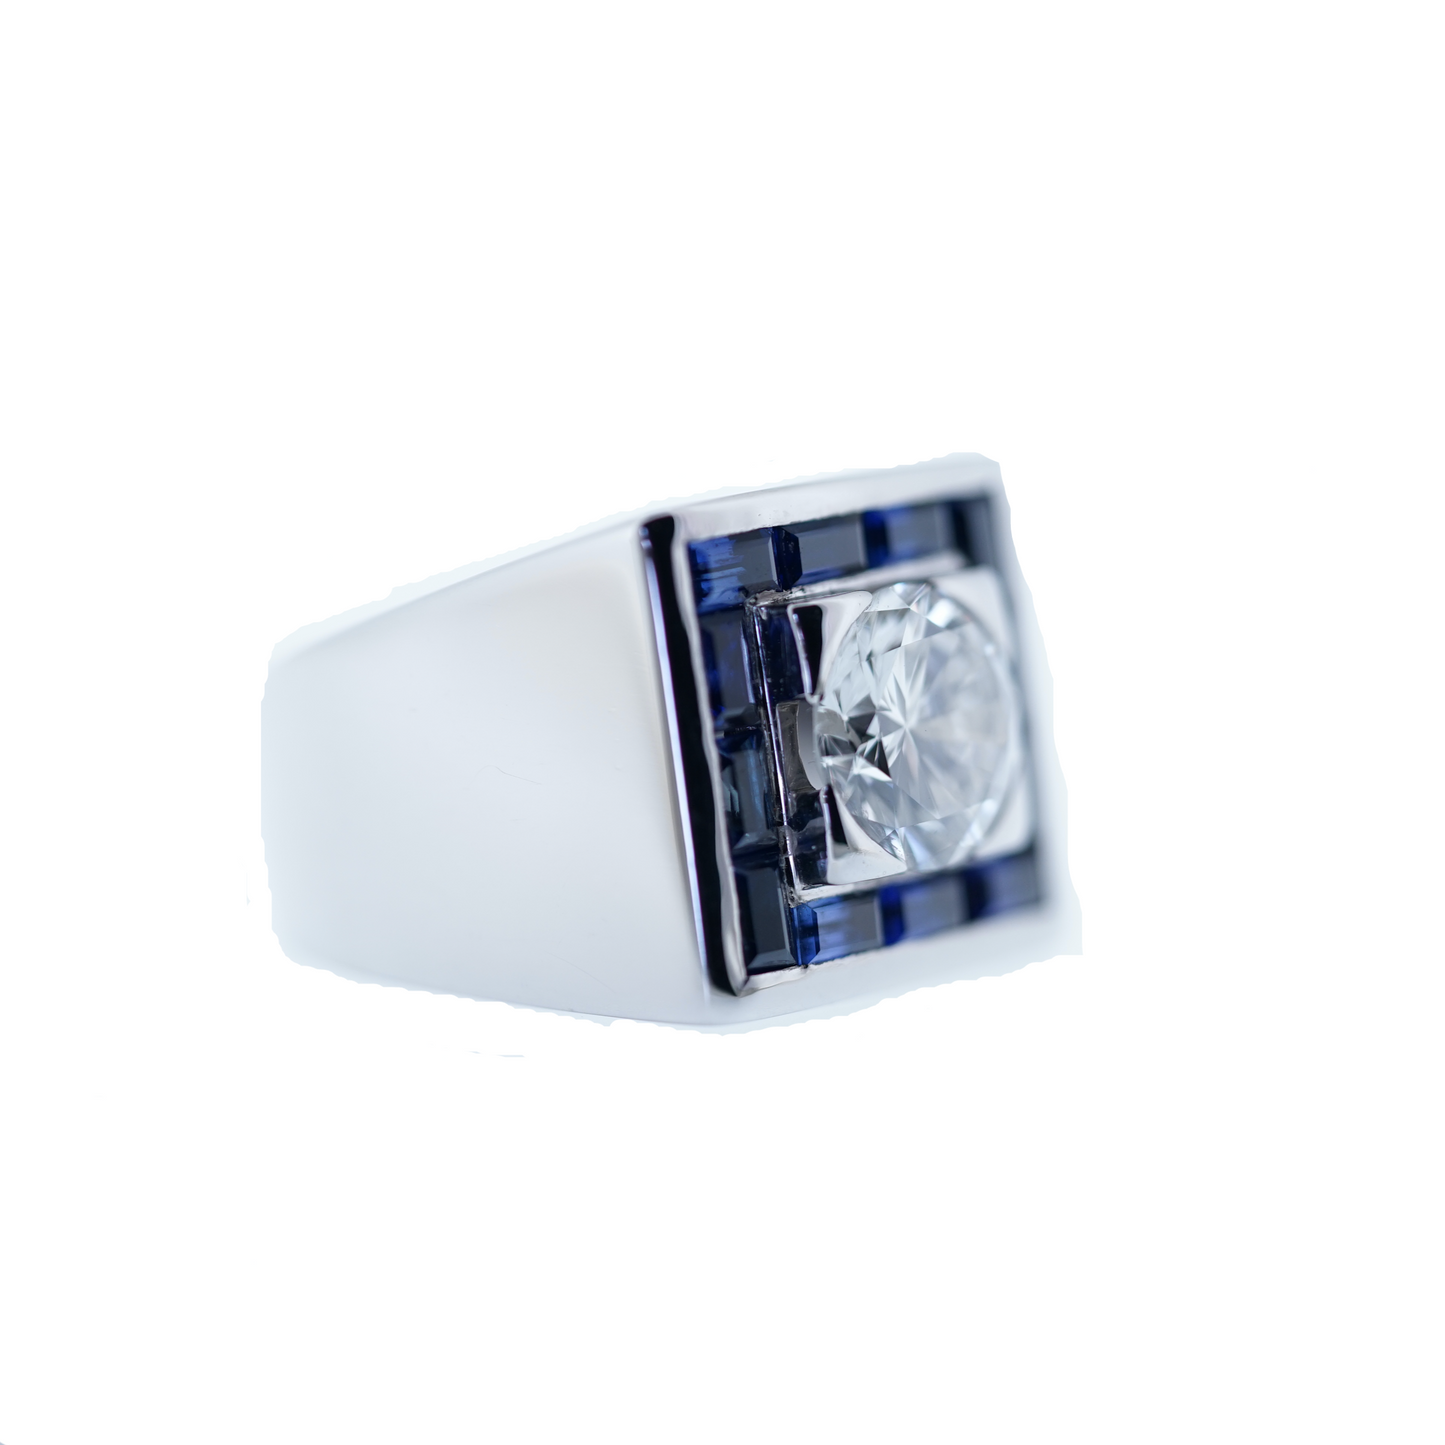 18 k White Gold Ring set with a 2ct Diamond surrounded by Sapphires